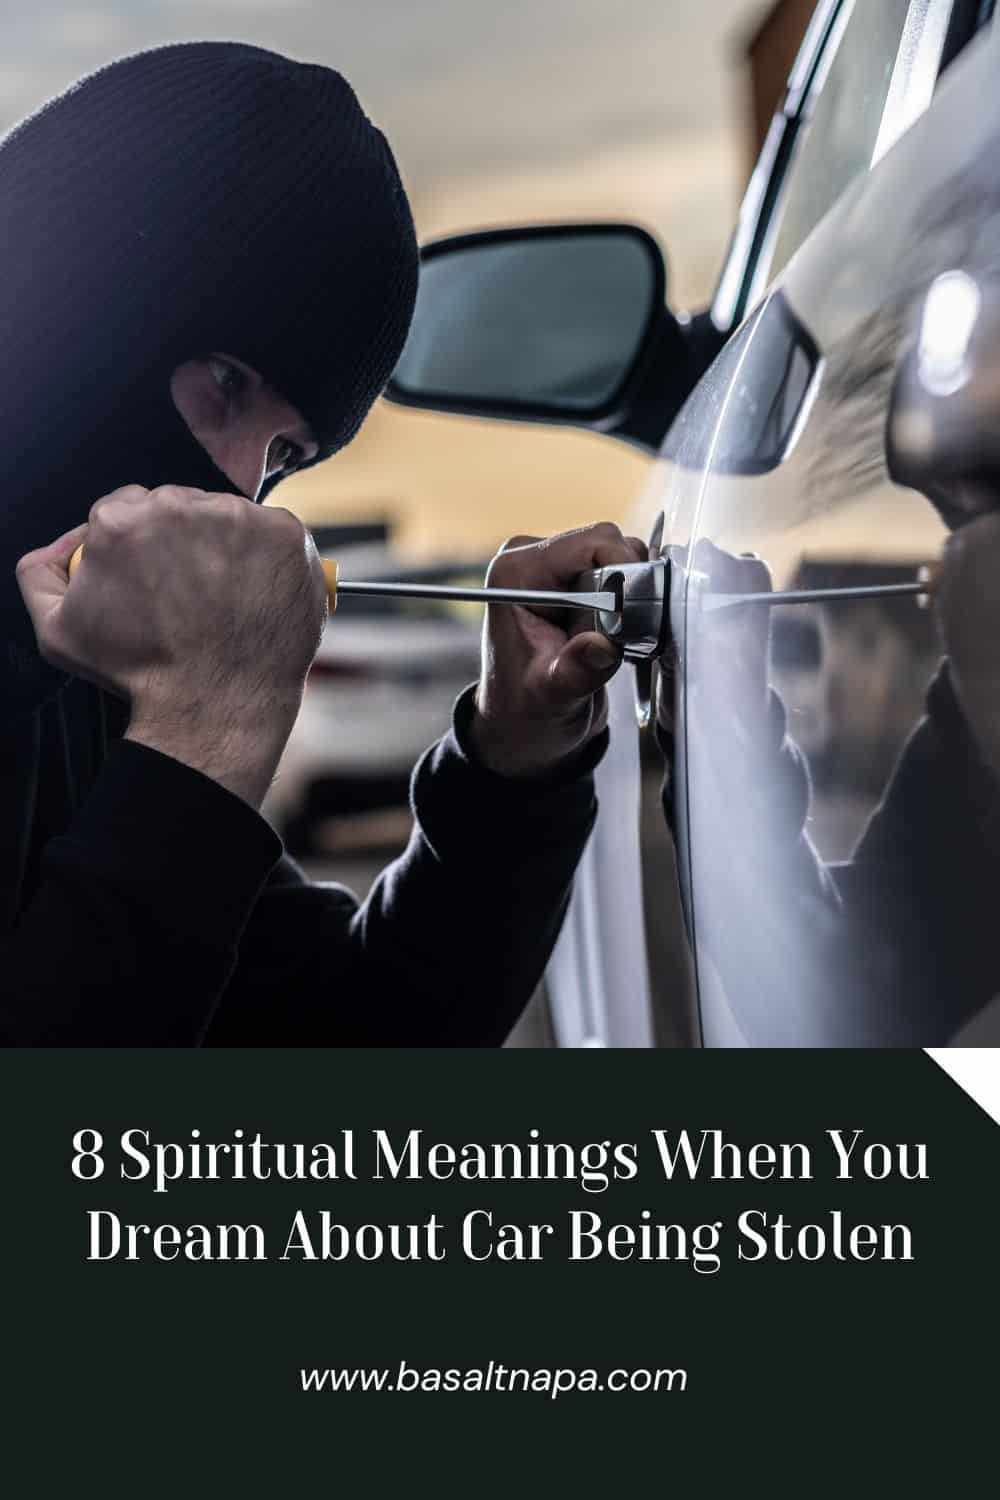 Spiritual Meanings of Your Car Being Stolen in Dreams